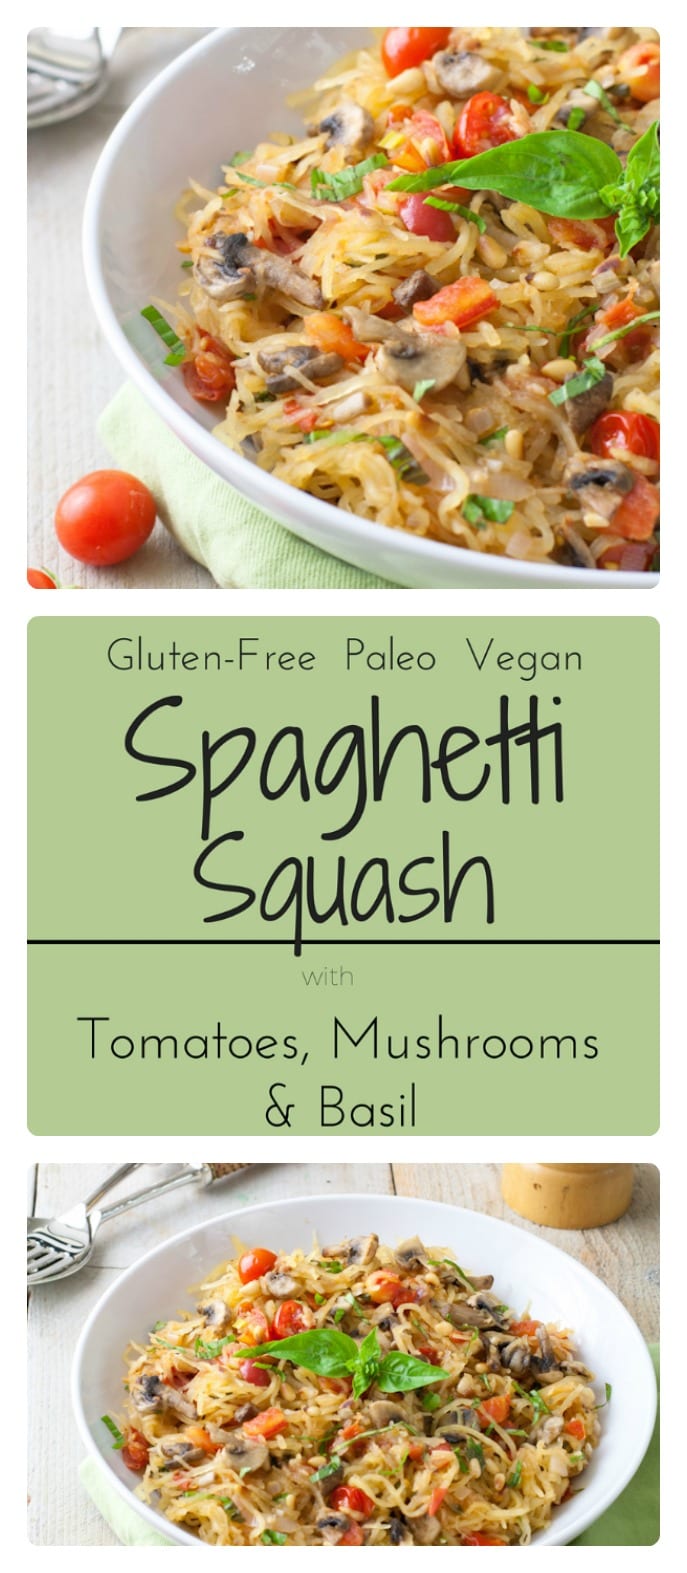 Spaghetti squash pasta with tomatoes, mushrooms and basil - image for Pinterest. 